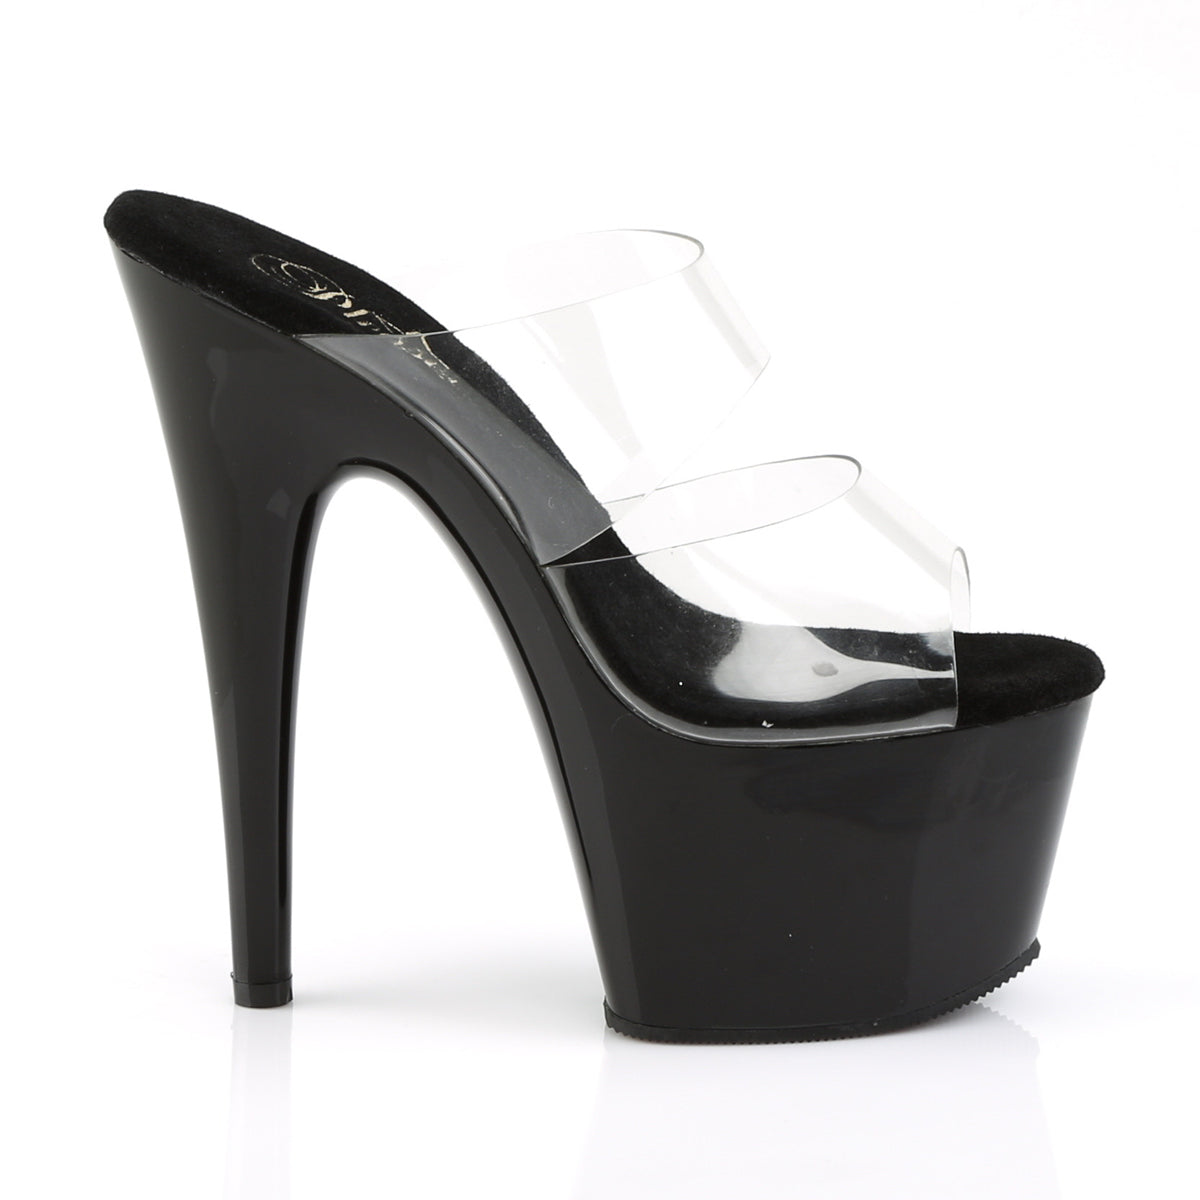 PLEASER ADORE-702 BLACK CLEAR DOUBLE STRAP 7 INCH HIGH HEEL PLATFORM SHOES SIZE 7